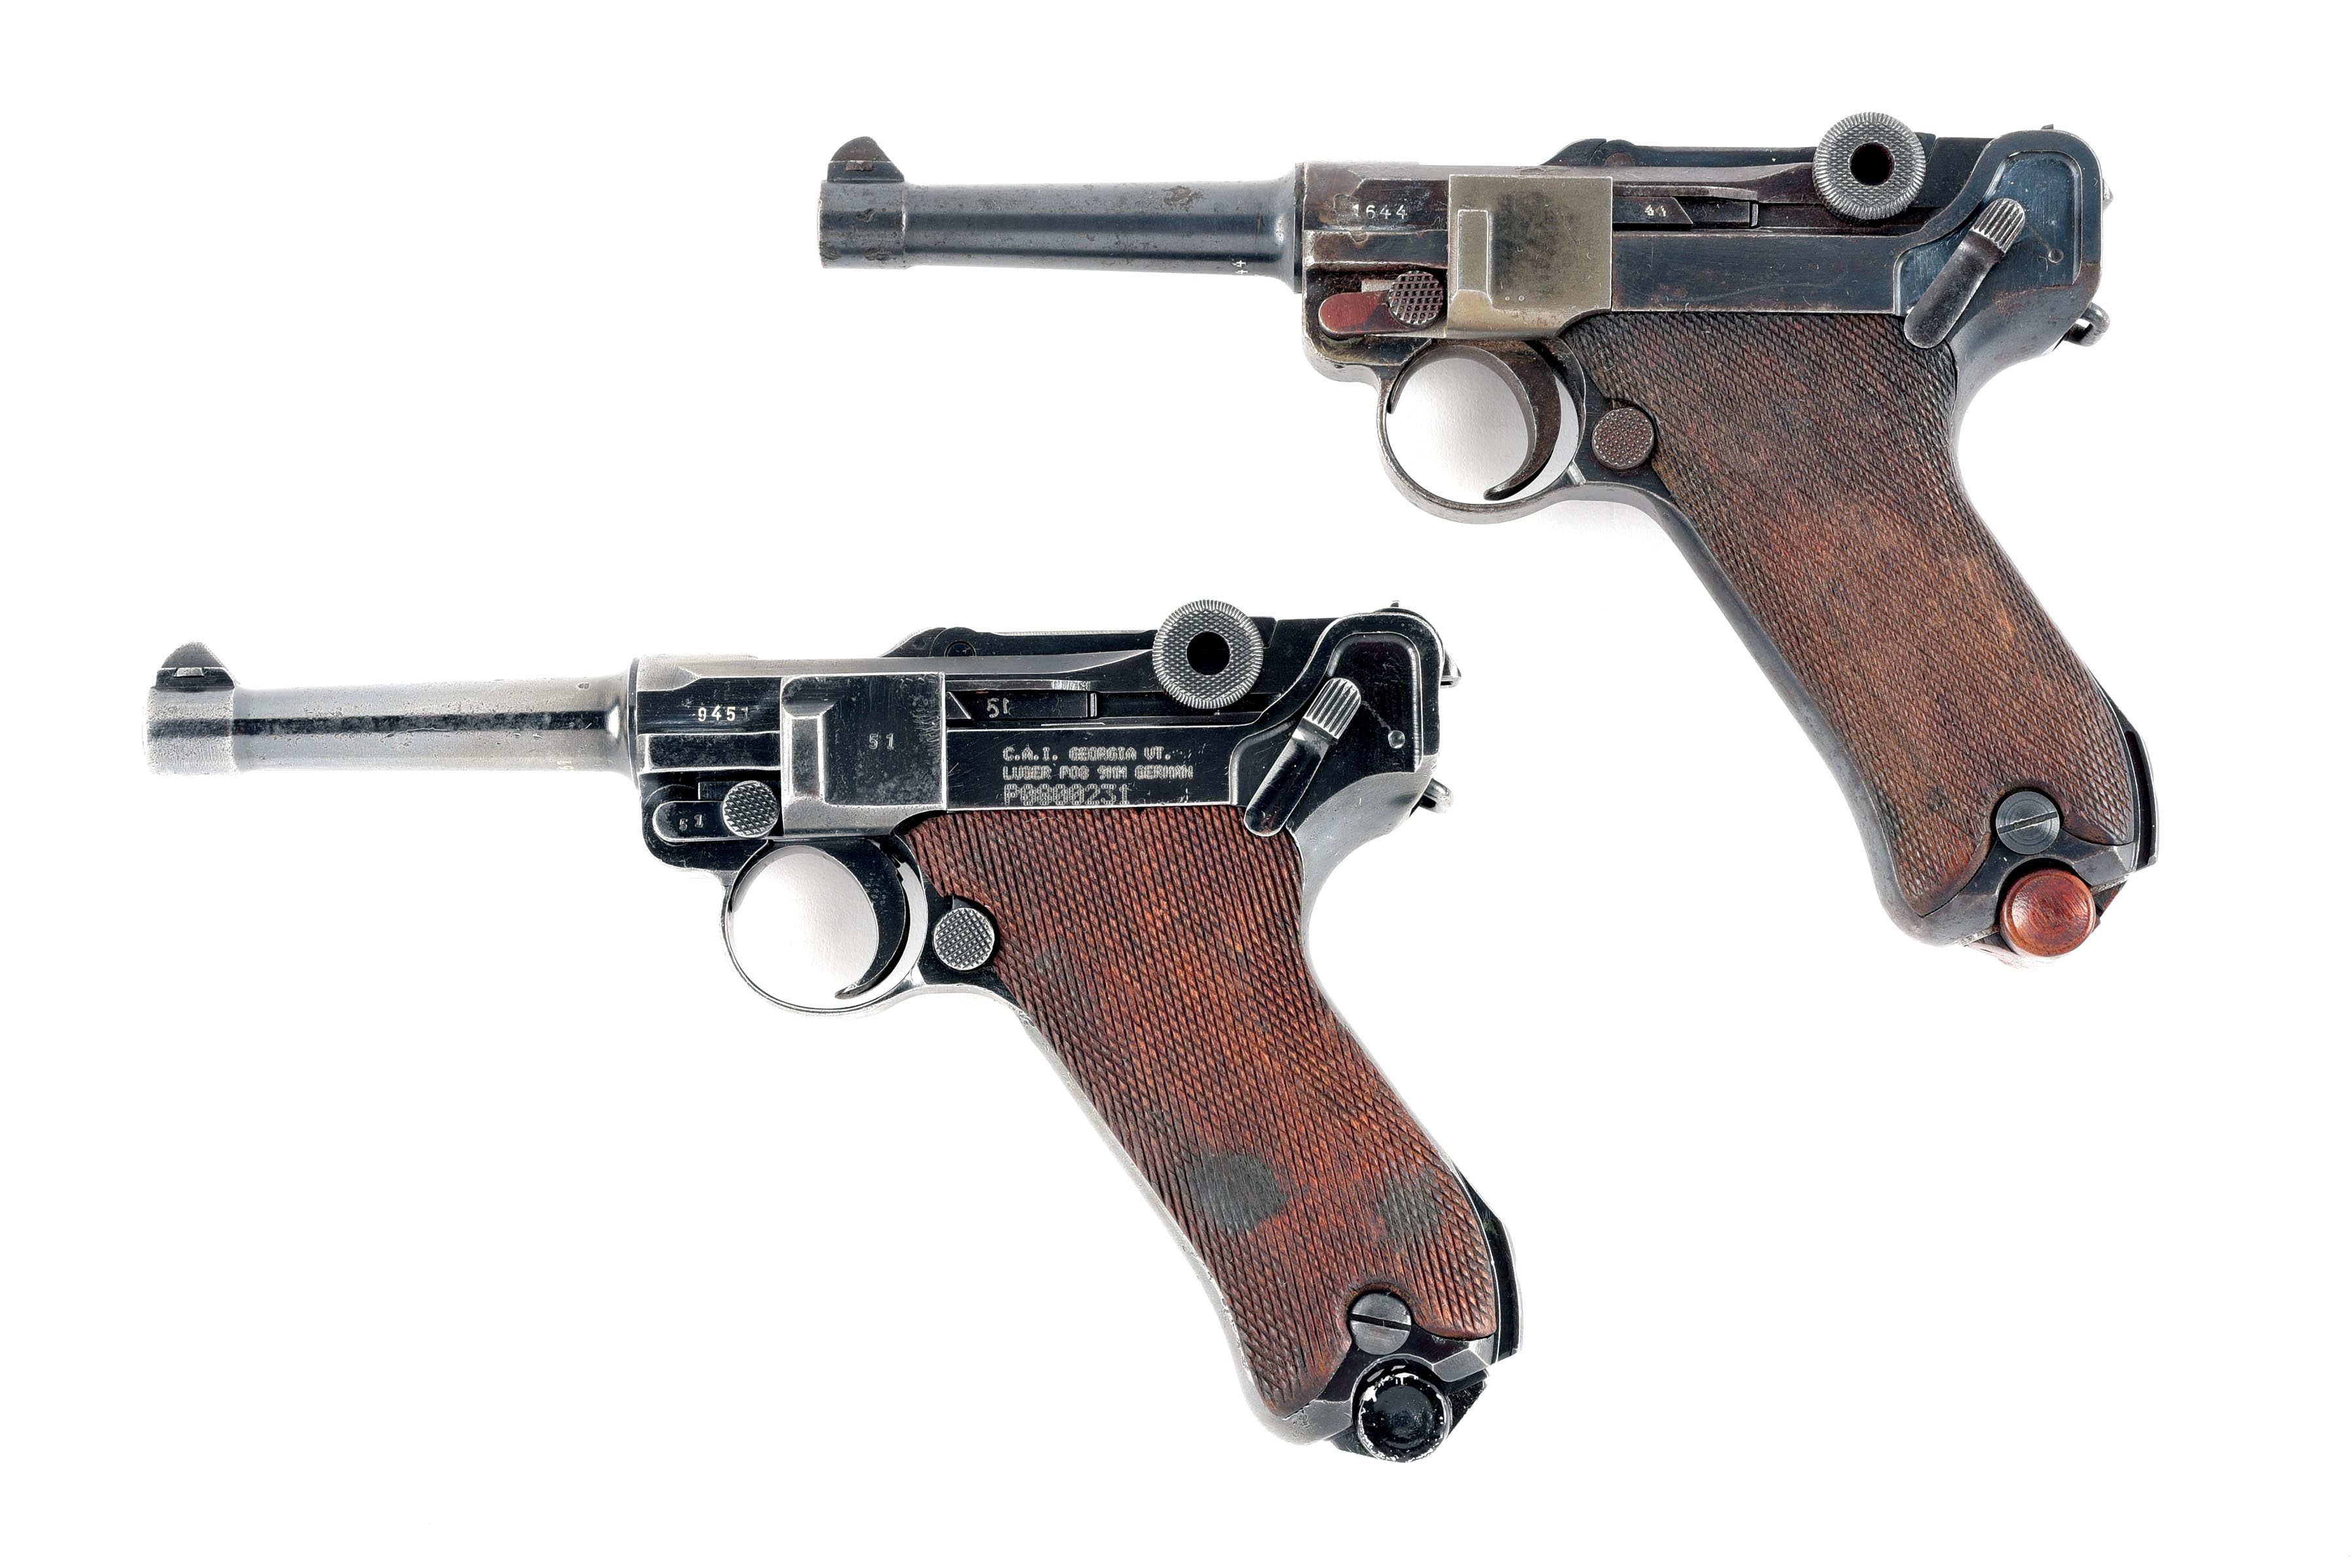 C Lot Of 2 A Dwm And B Mauser P08 Luger Semi Automatic Pistols Auctions And Price Archive 1704